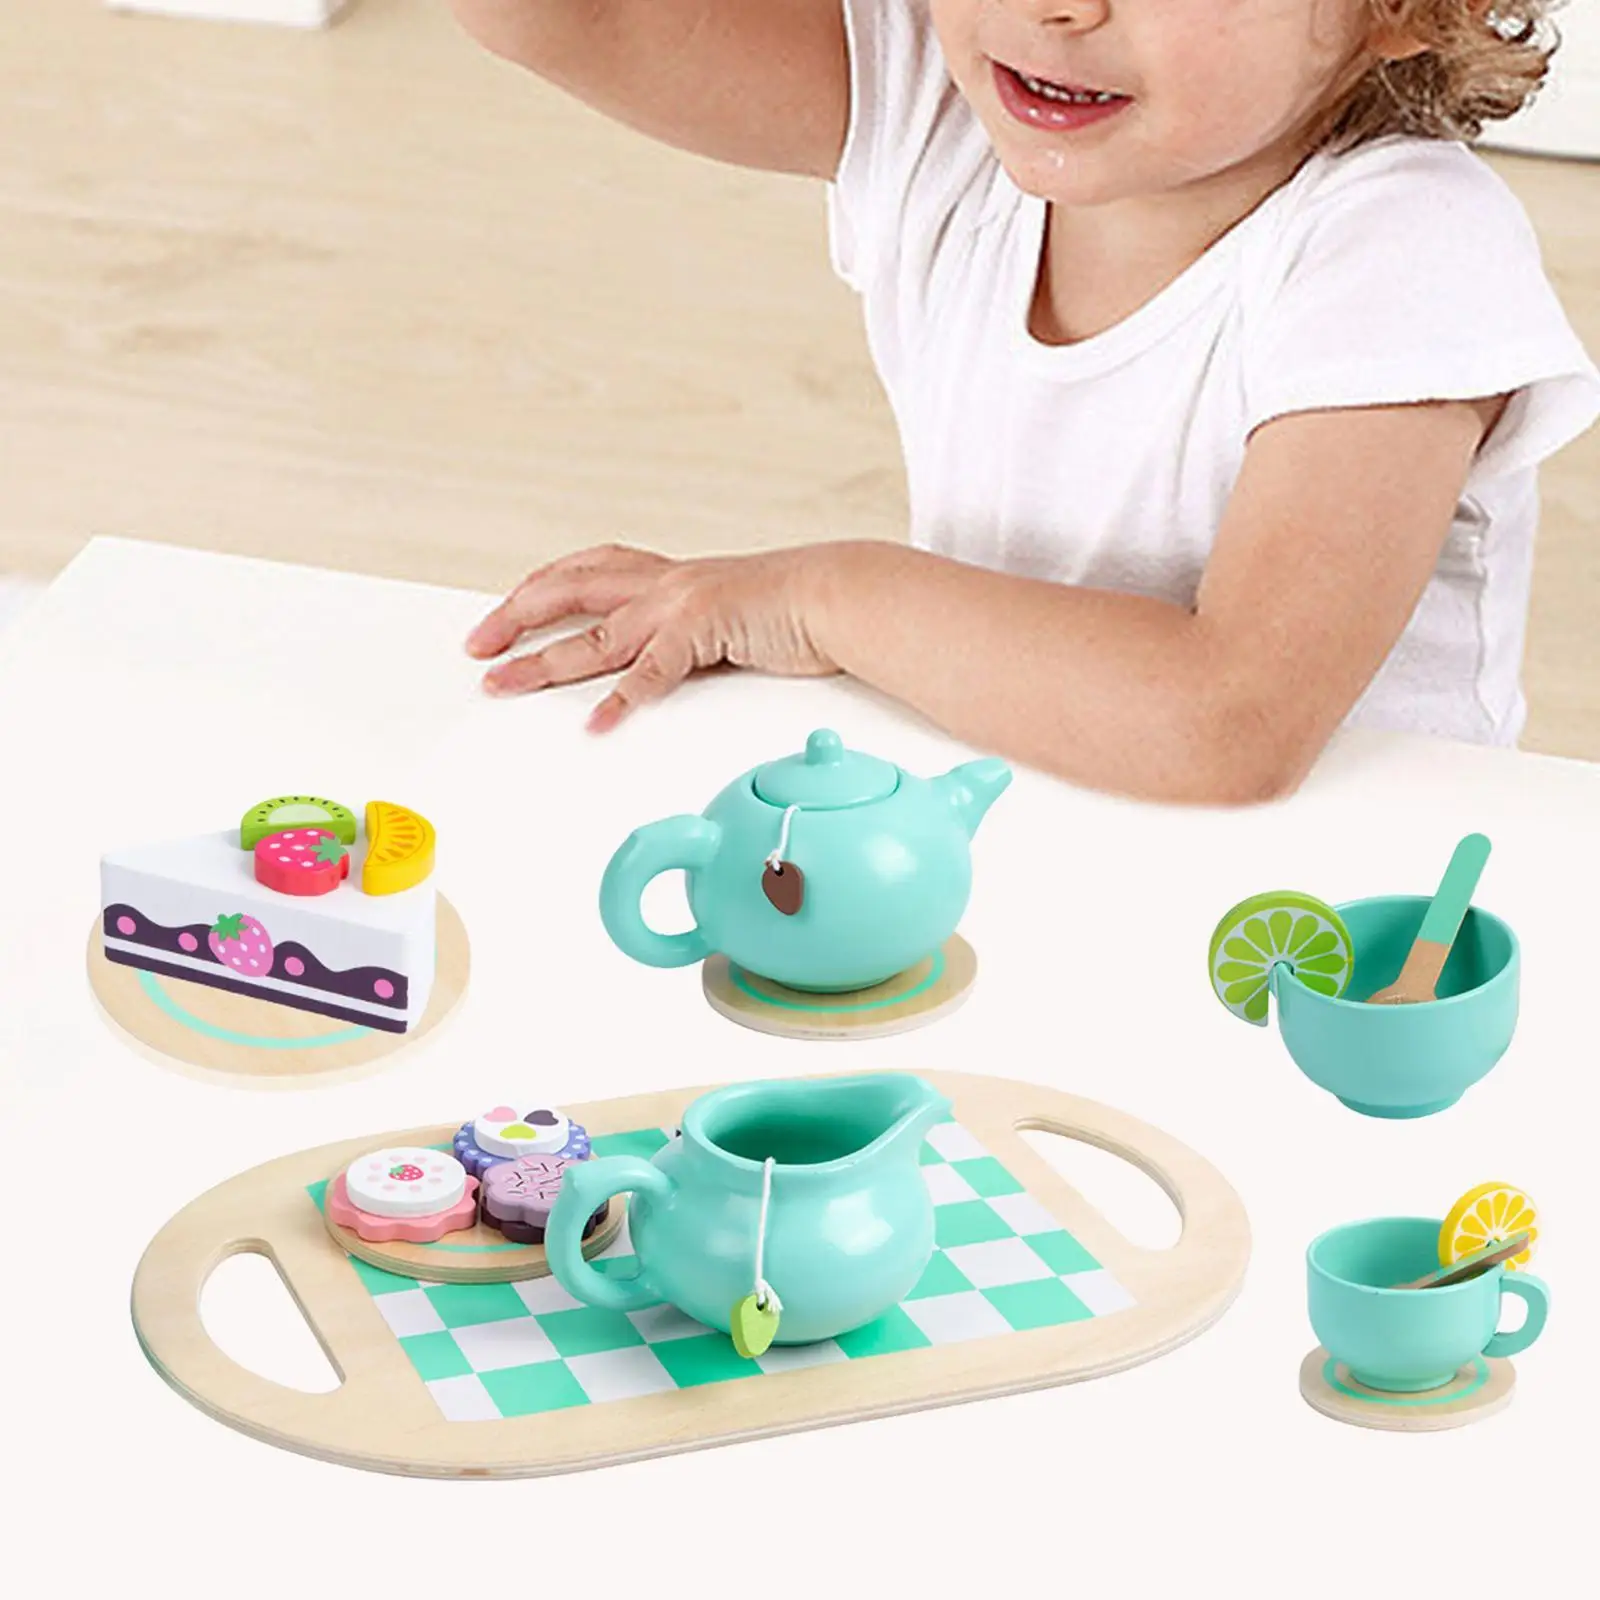 

Tea Party Toys with Teapot, Coaster, Coffee Mugs, Spoons, Saucers, and Serving Tray Wooden Tea Set for Children Party Favors